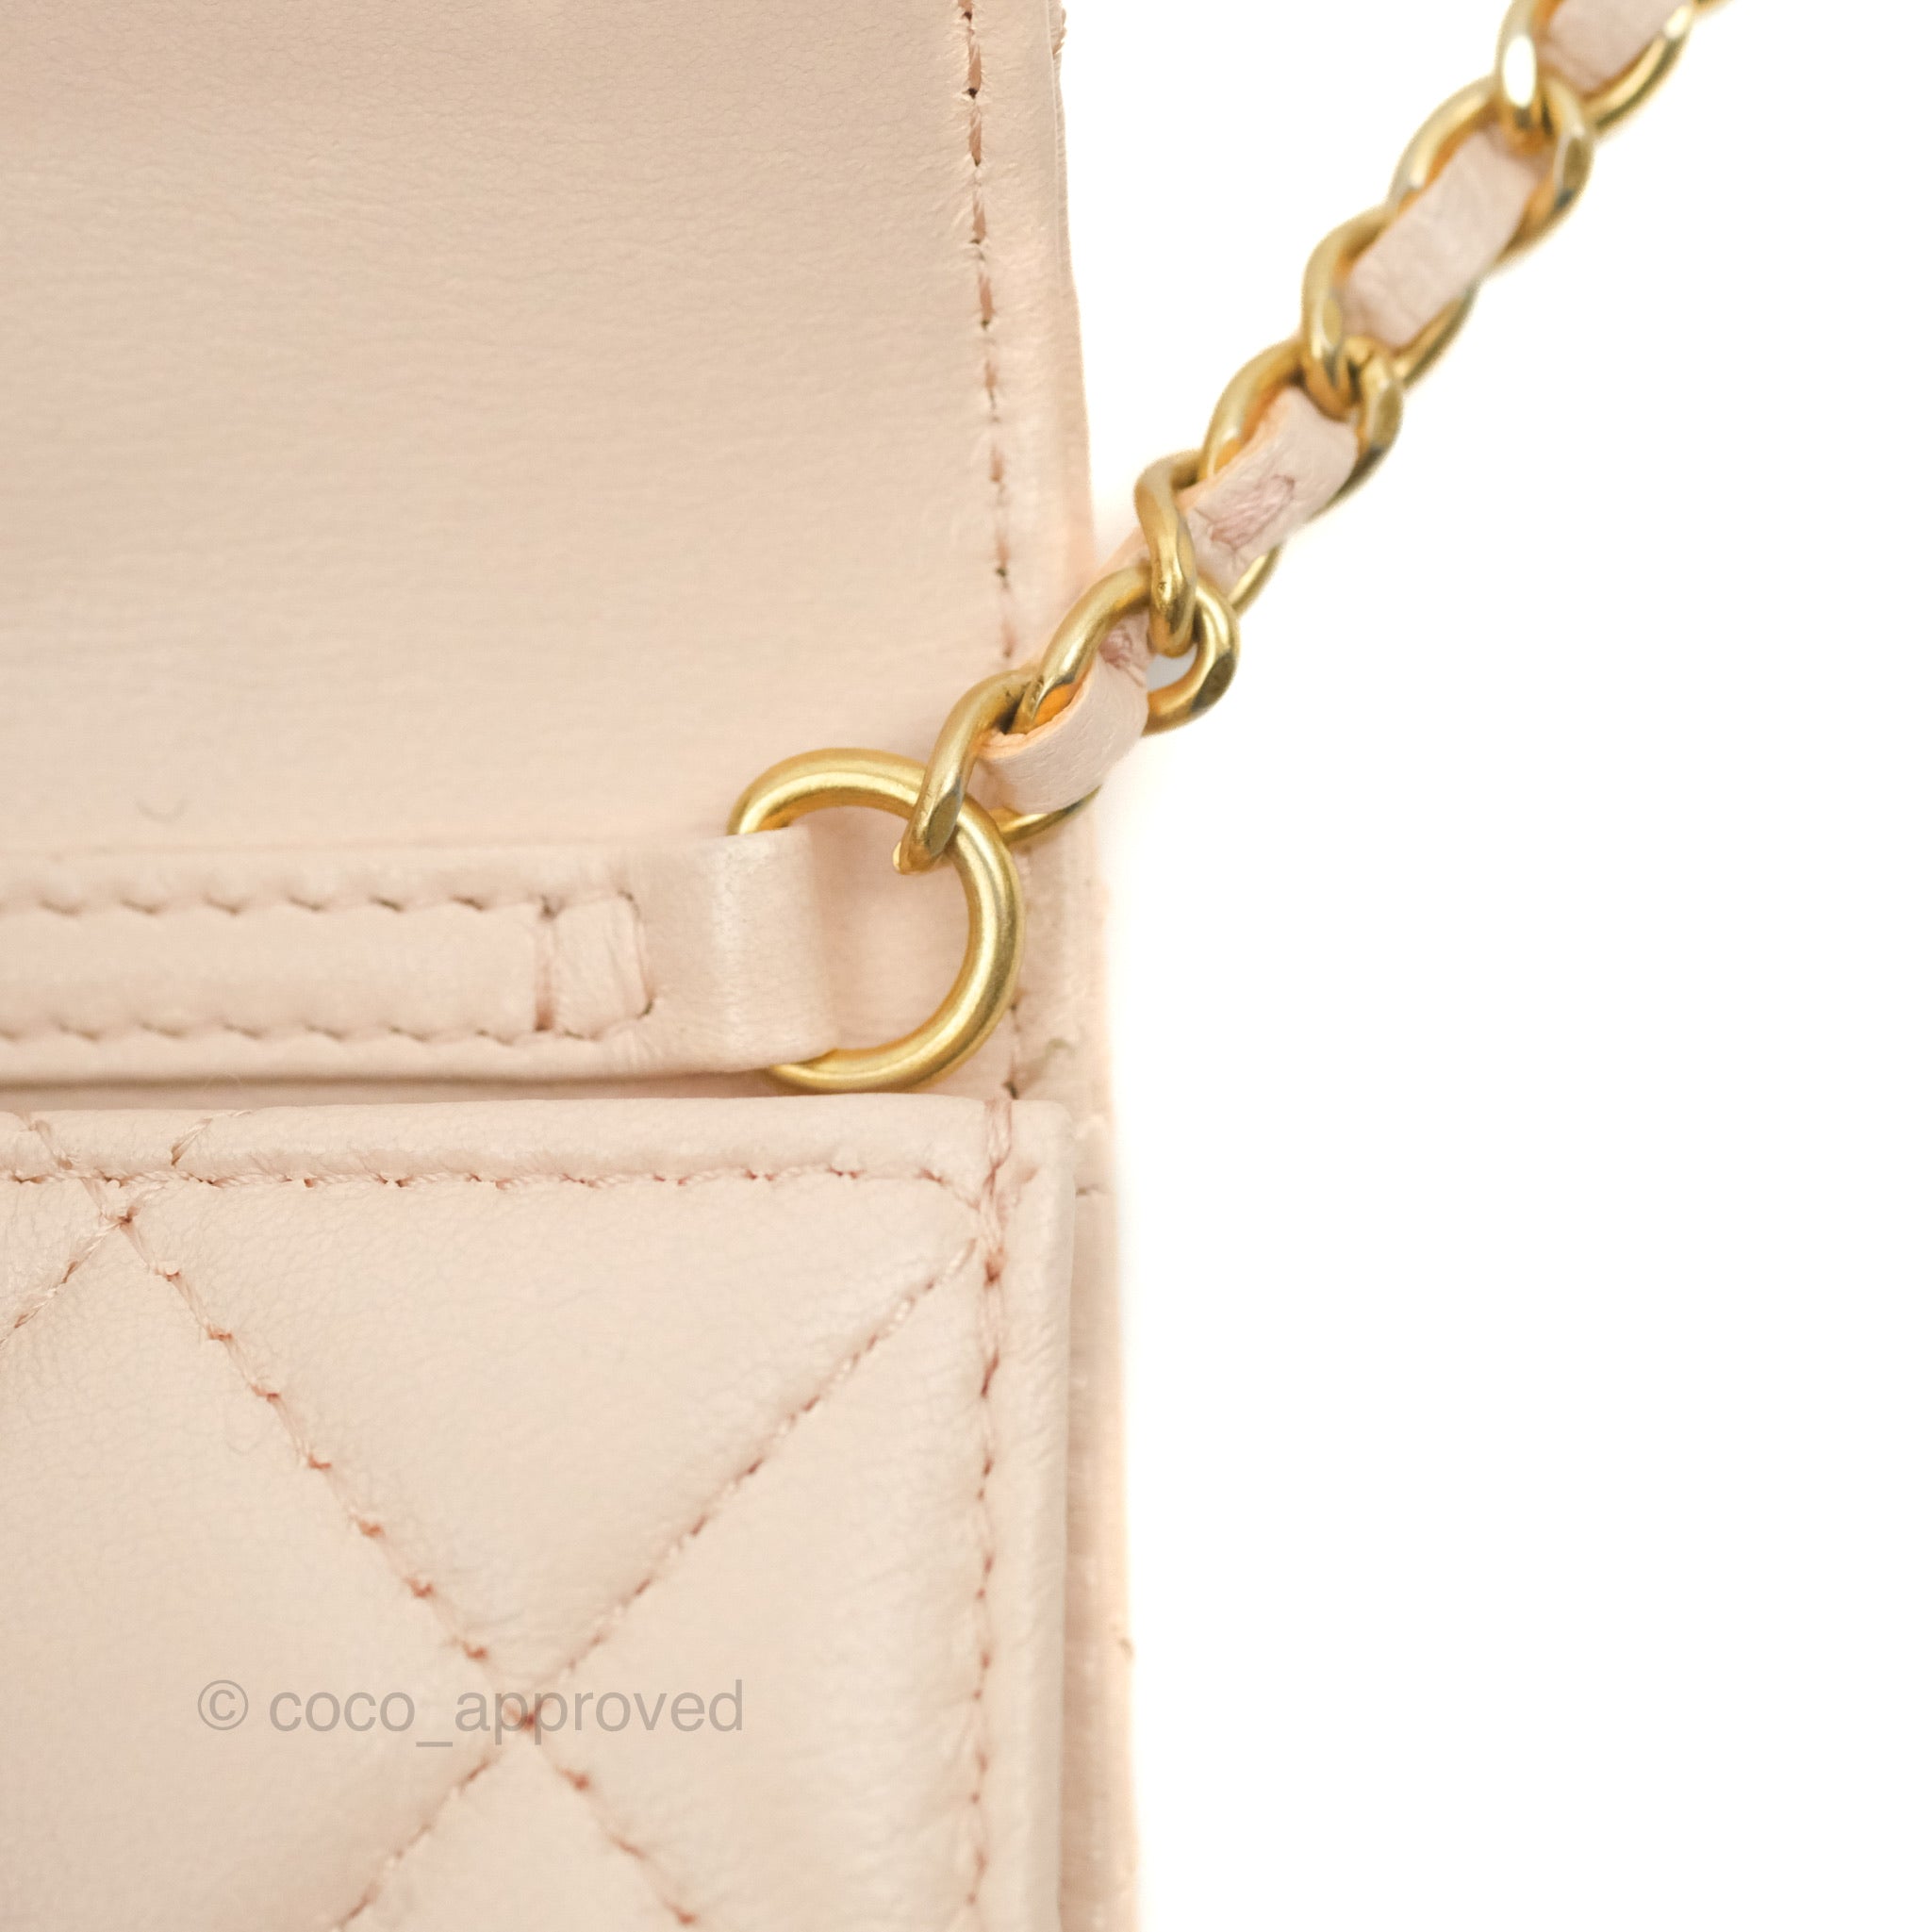 Chanel Small Clutch with Pearl Chain, Bragmybag